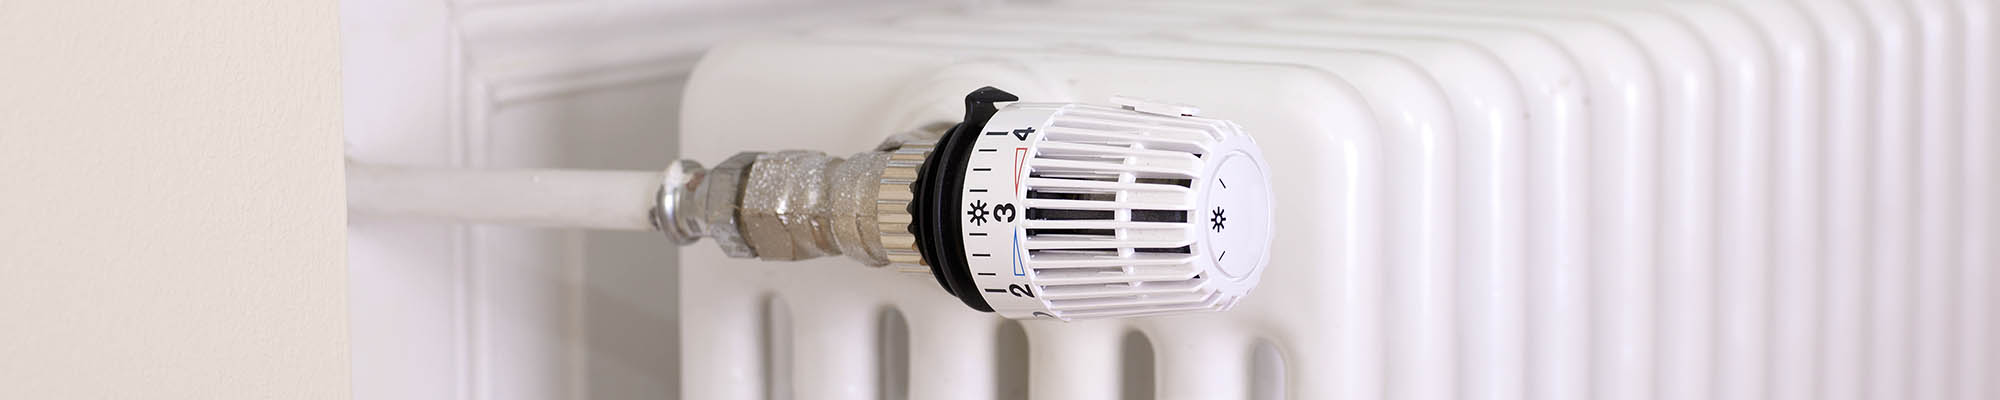 Gas & Central Heating Services - Nottingham